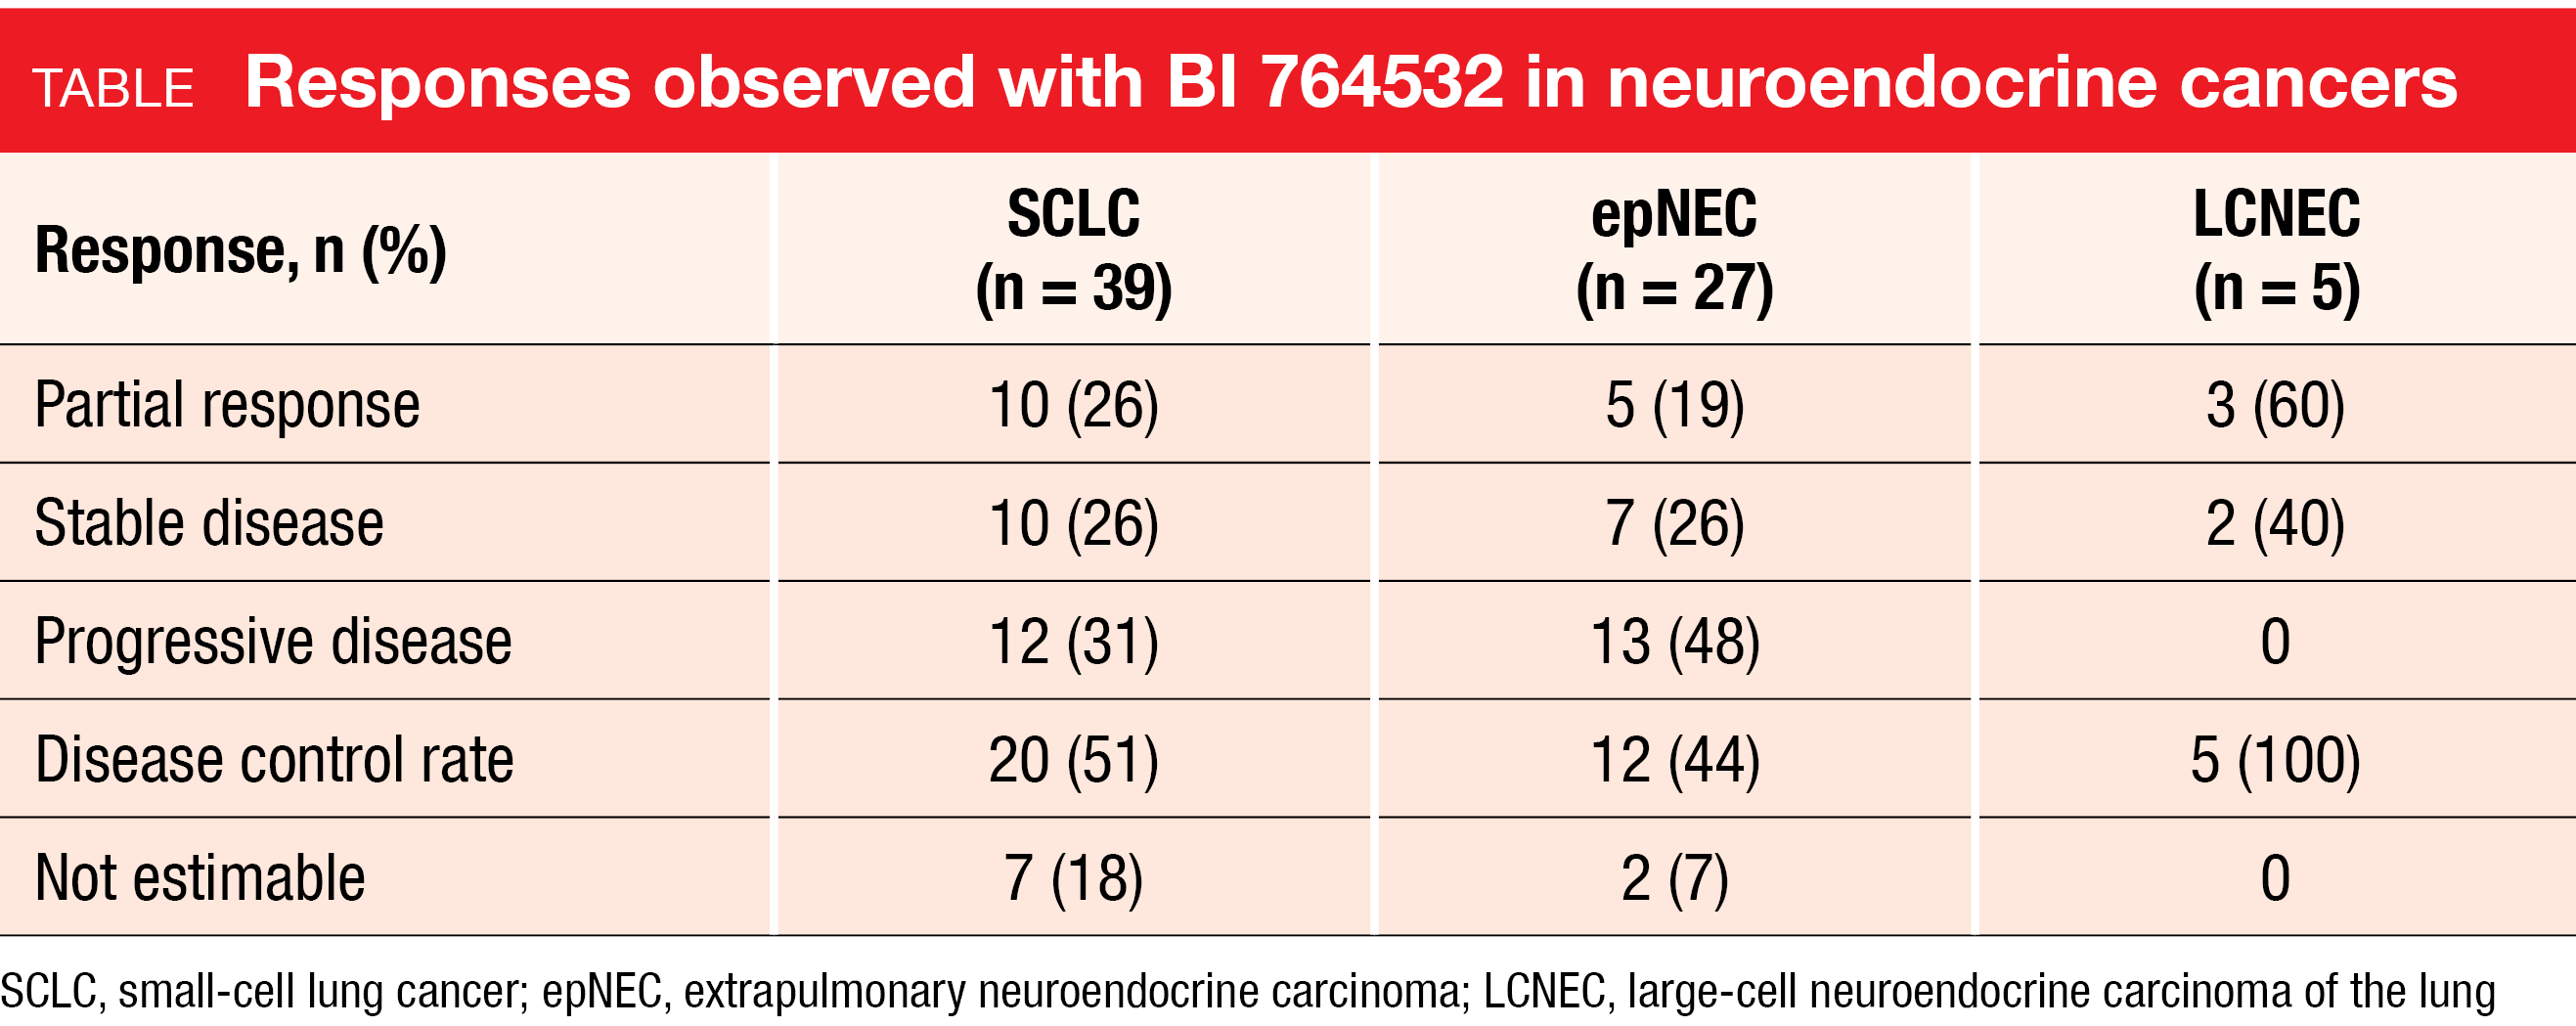 Table Responses observed with BI 764532 in neuroendocrine cancers